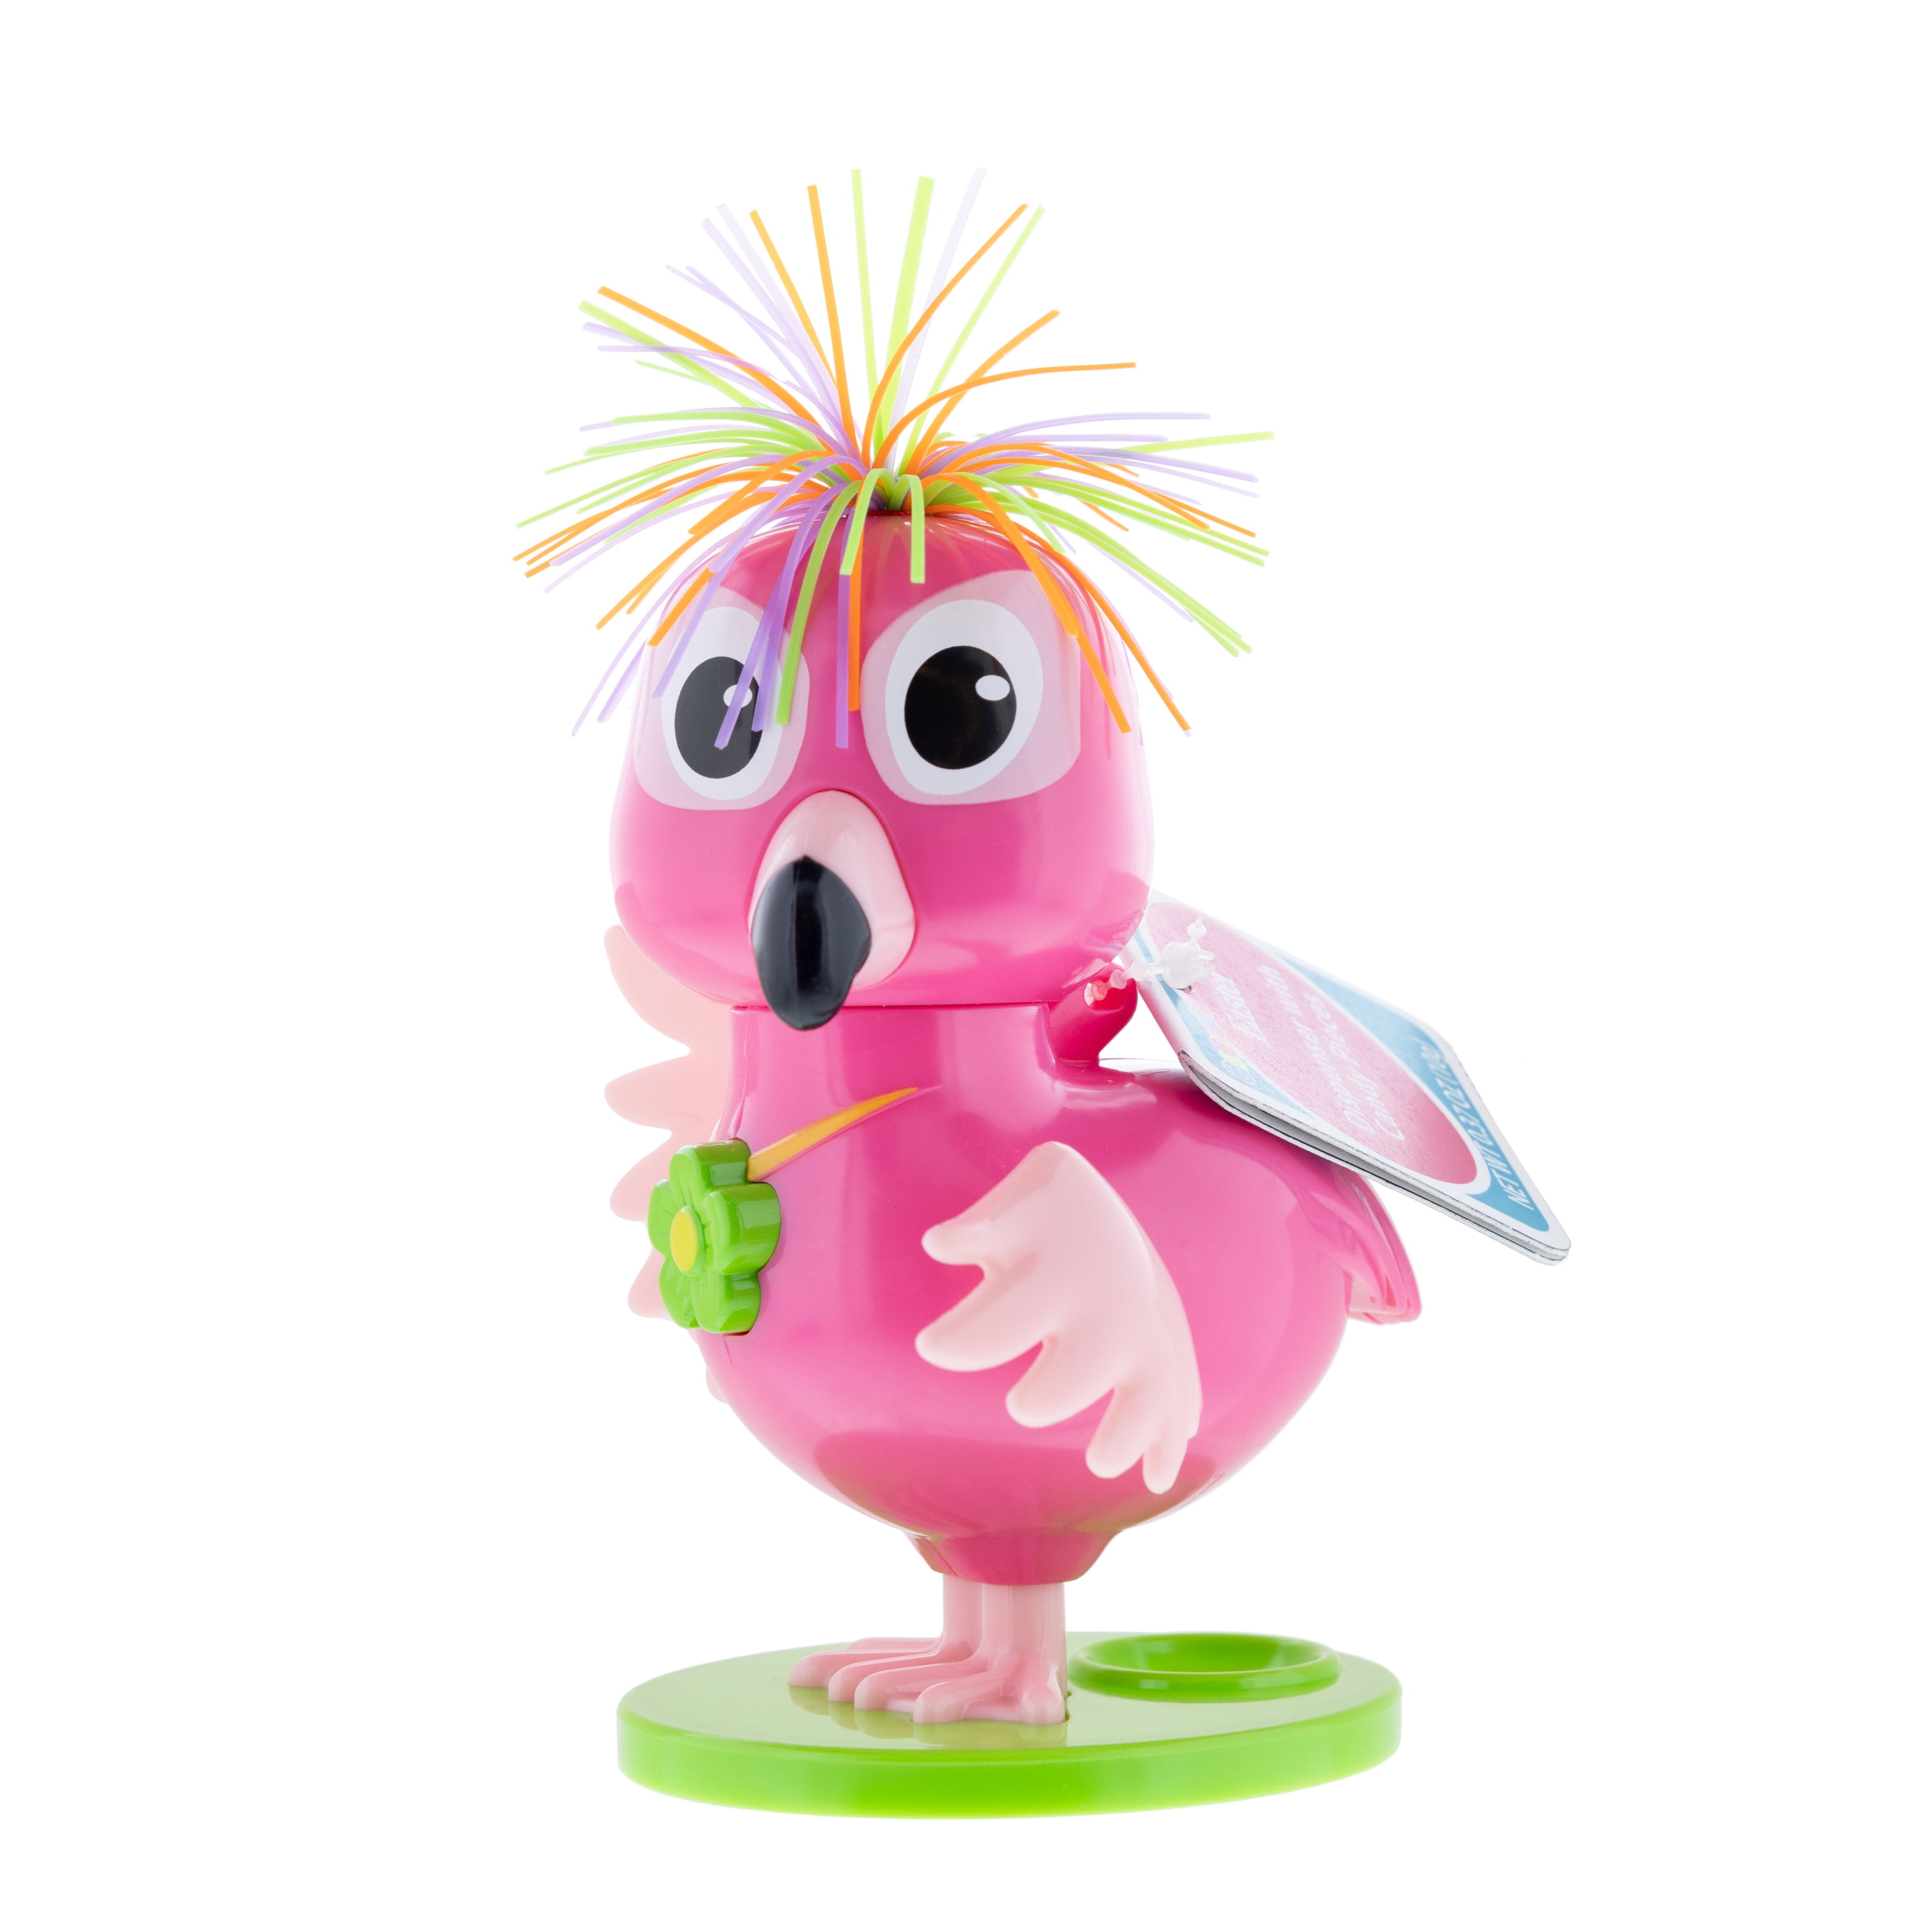 Galerie Flamingo Dispenser with Candy, 0.37 oz